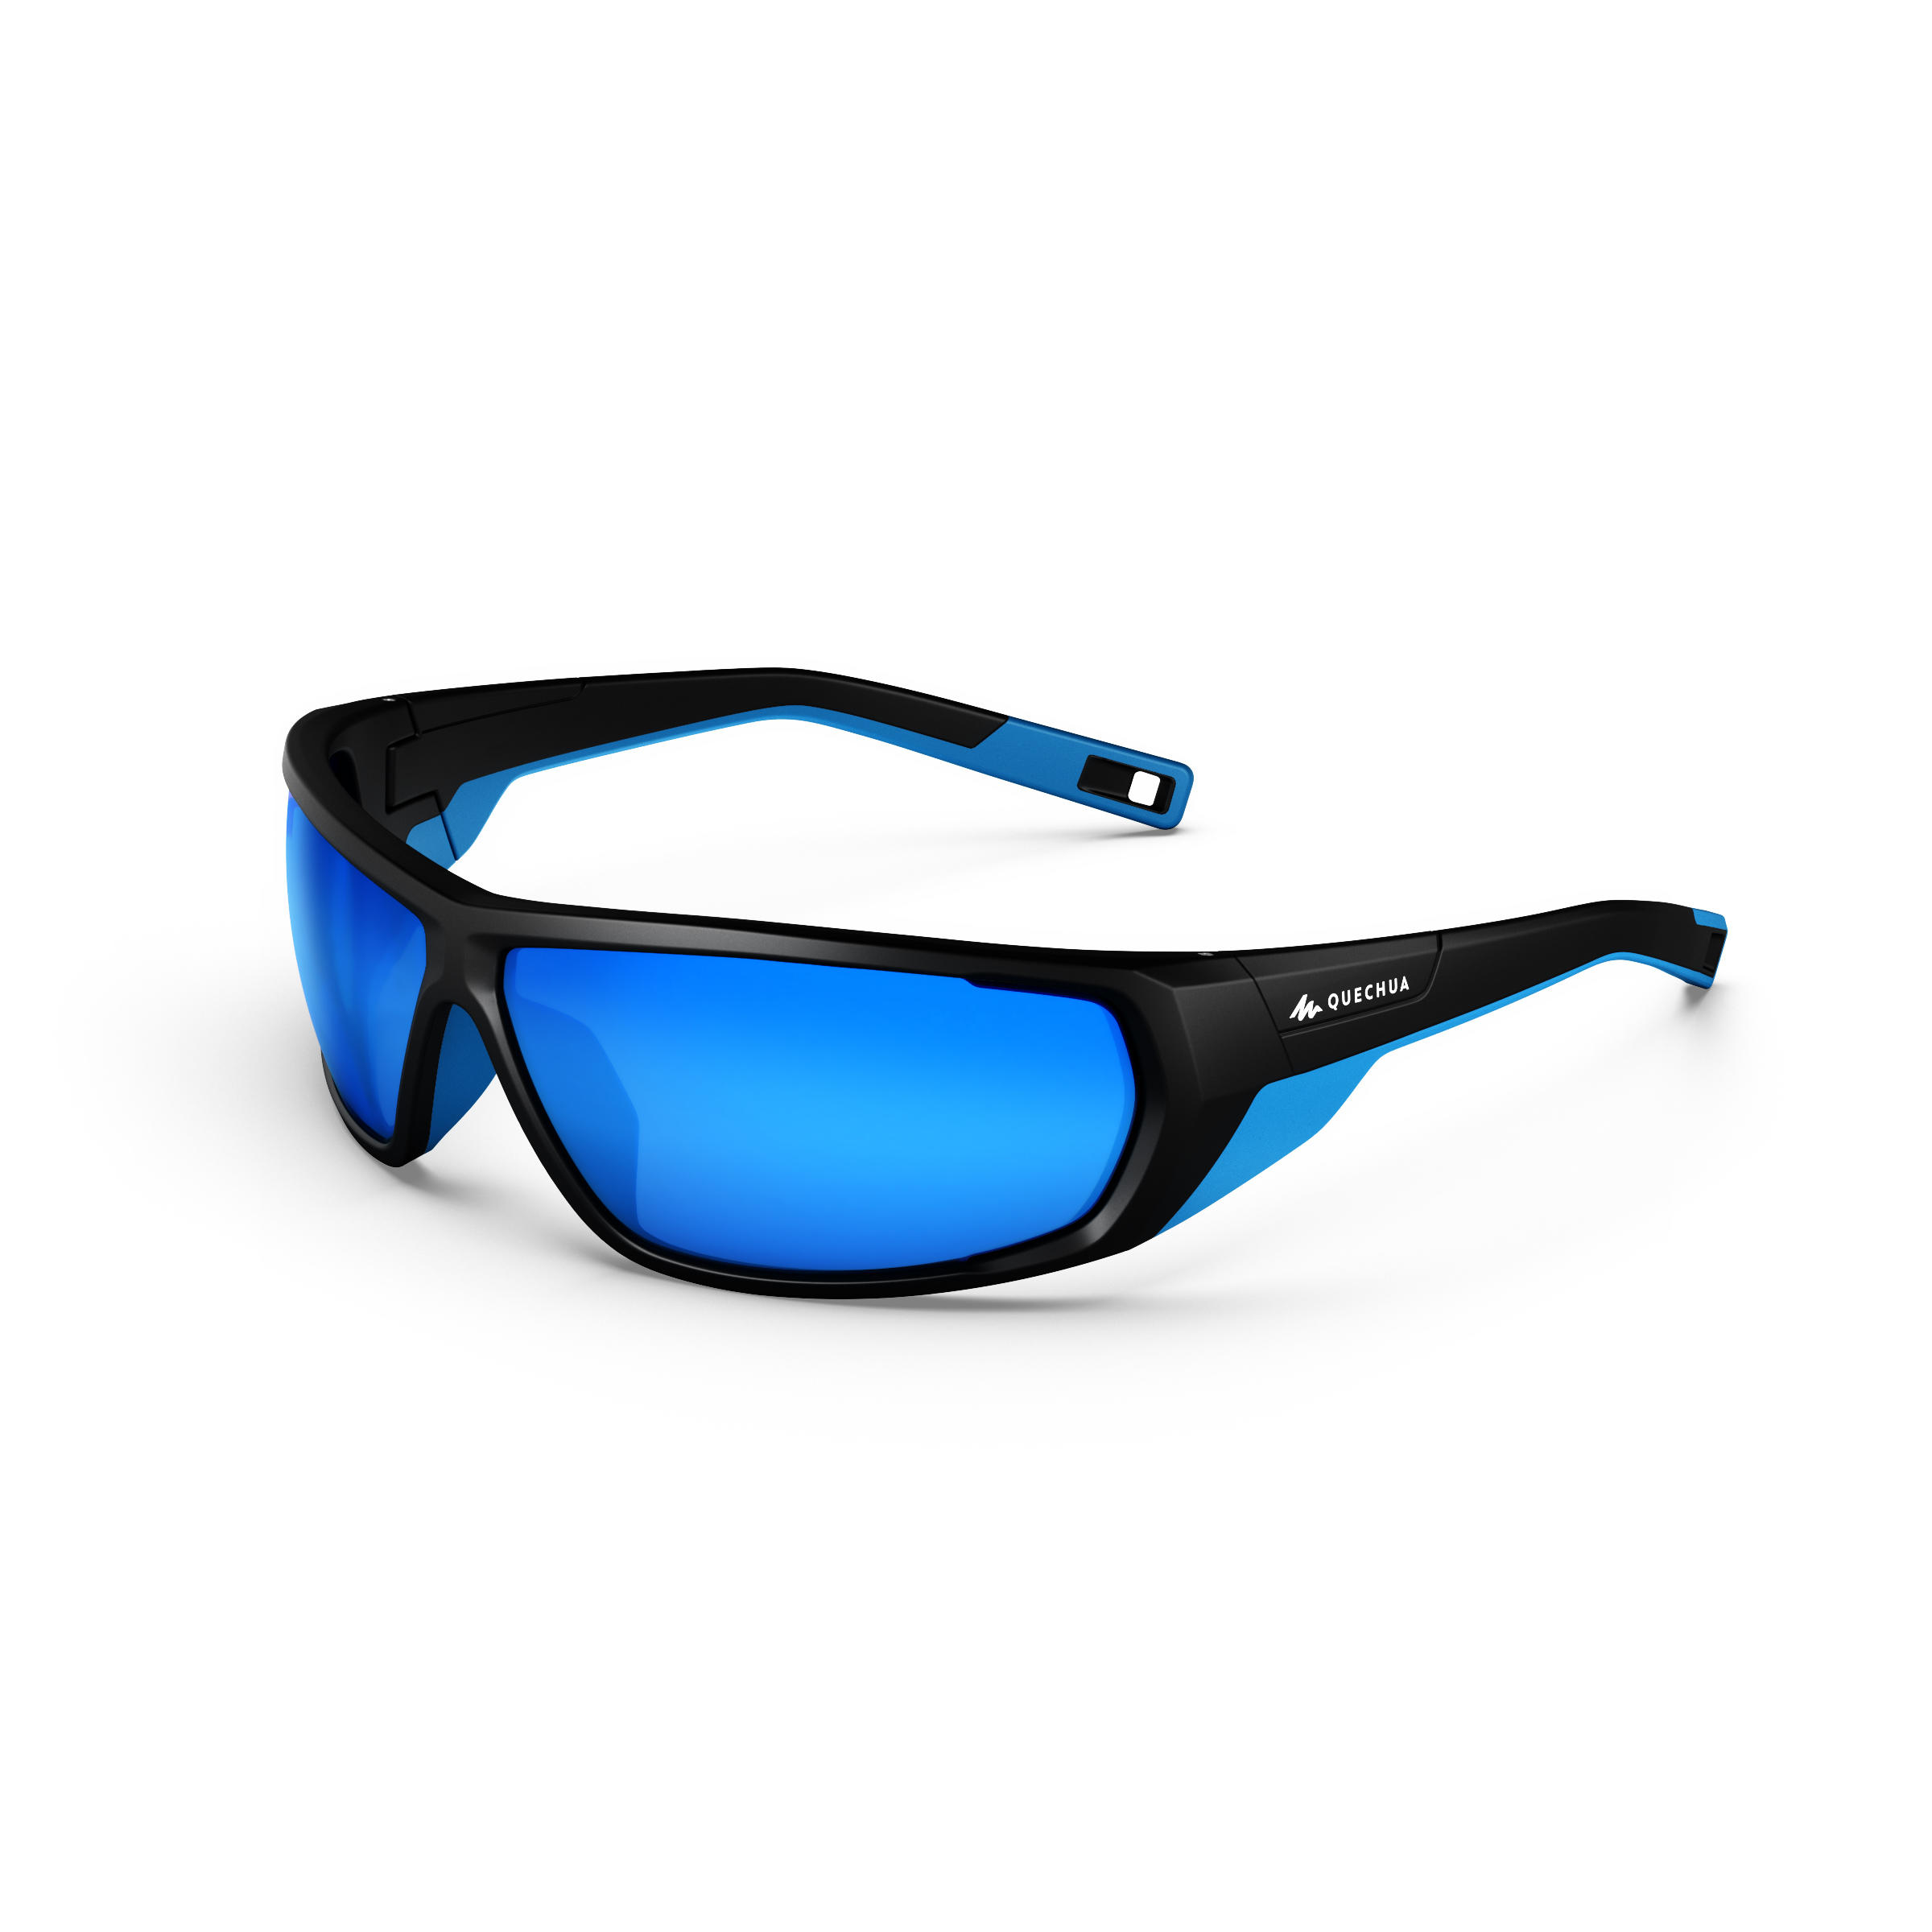 Importance of Eyewear for Outdoor Sports